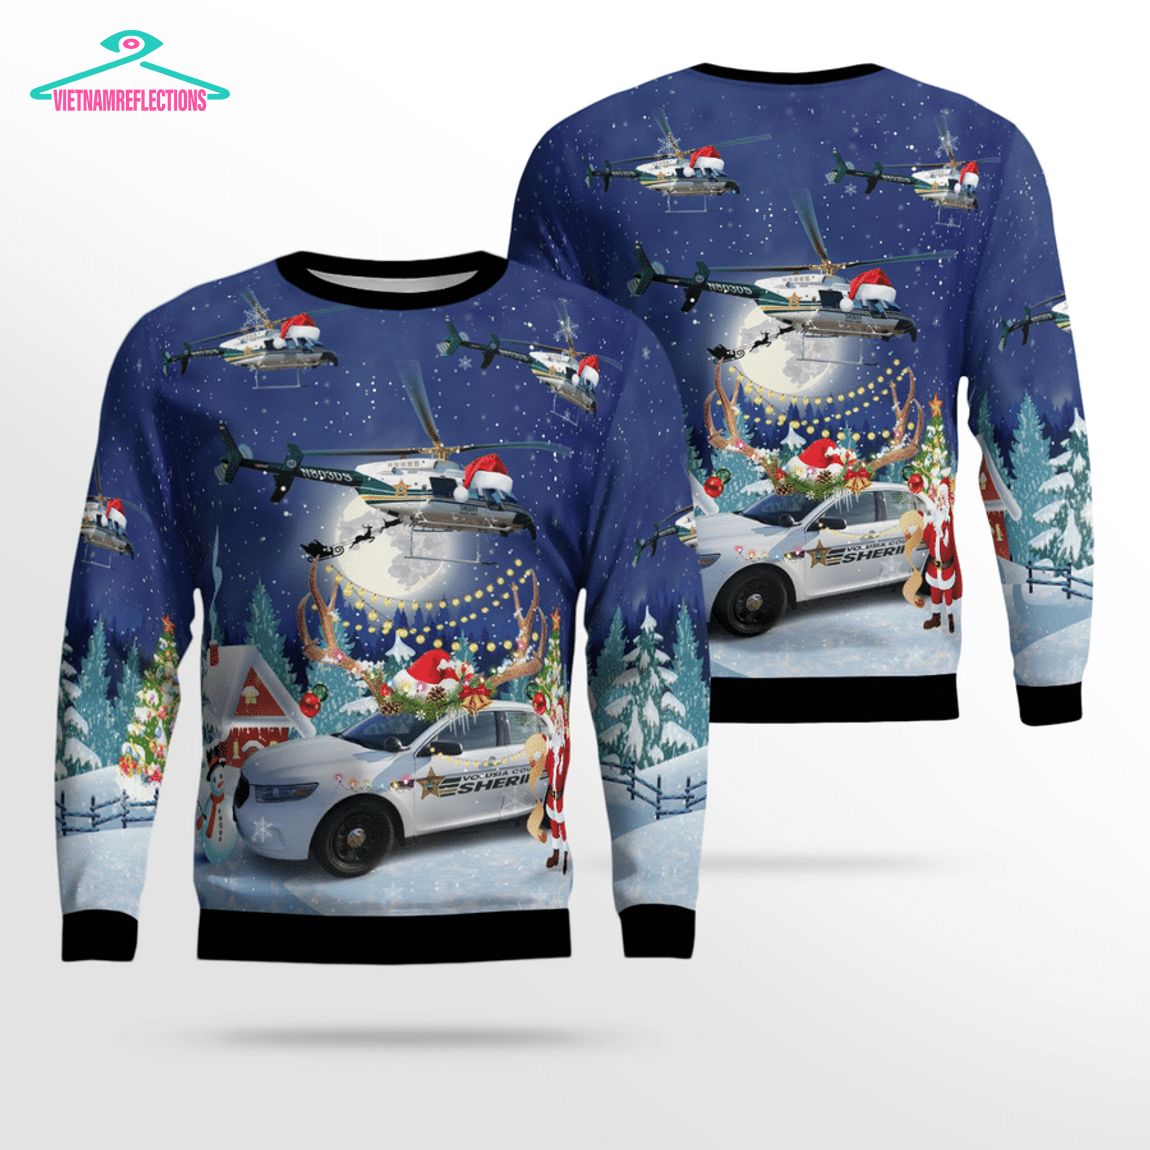 Volusia County Sheriff Bell 407 And Ford Police Interceptor 3D Christmas Sweater